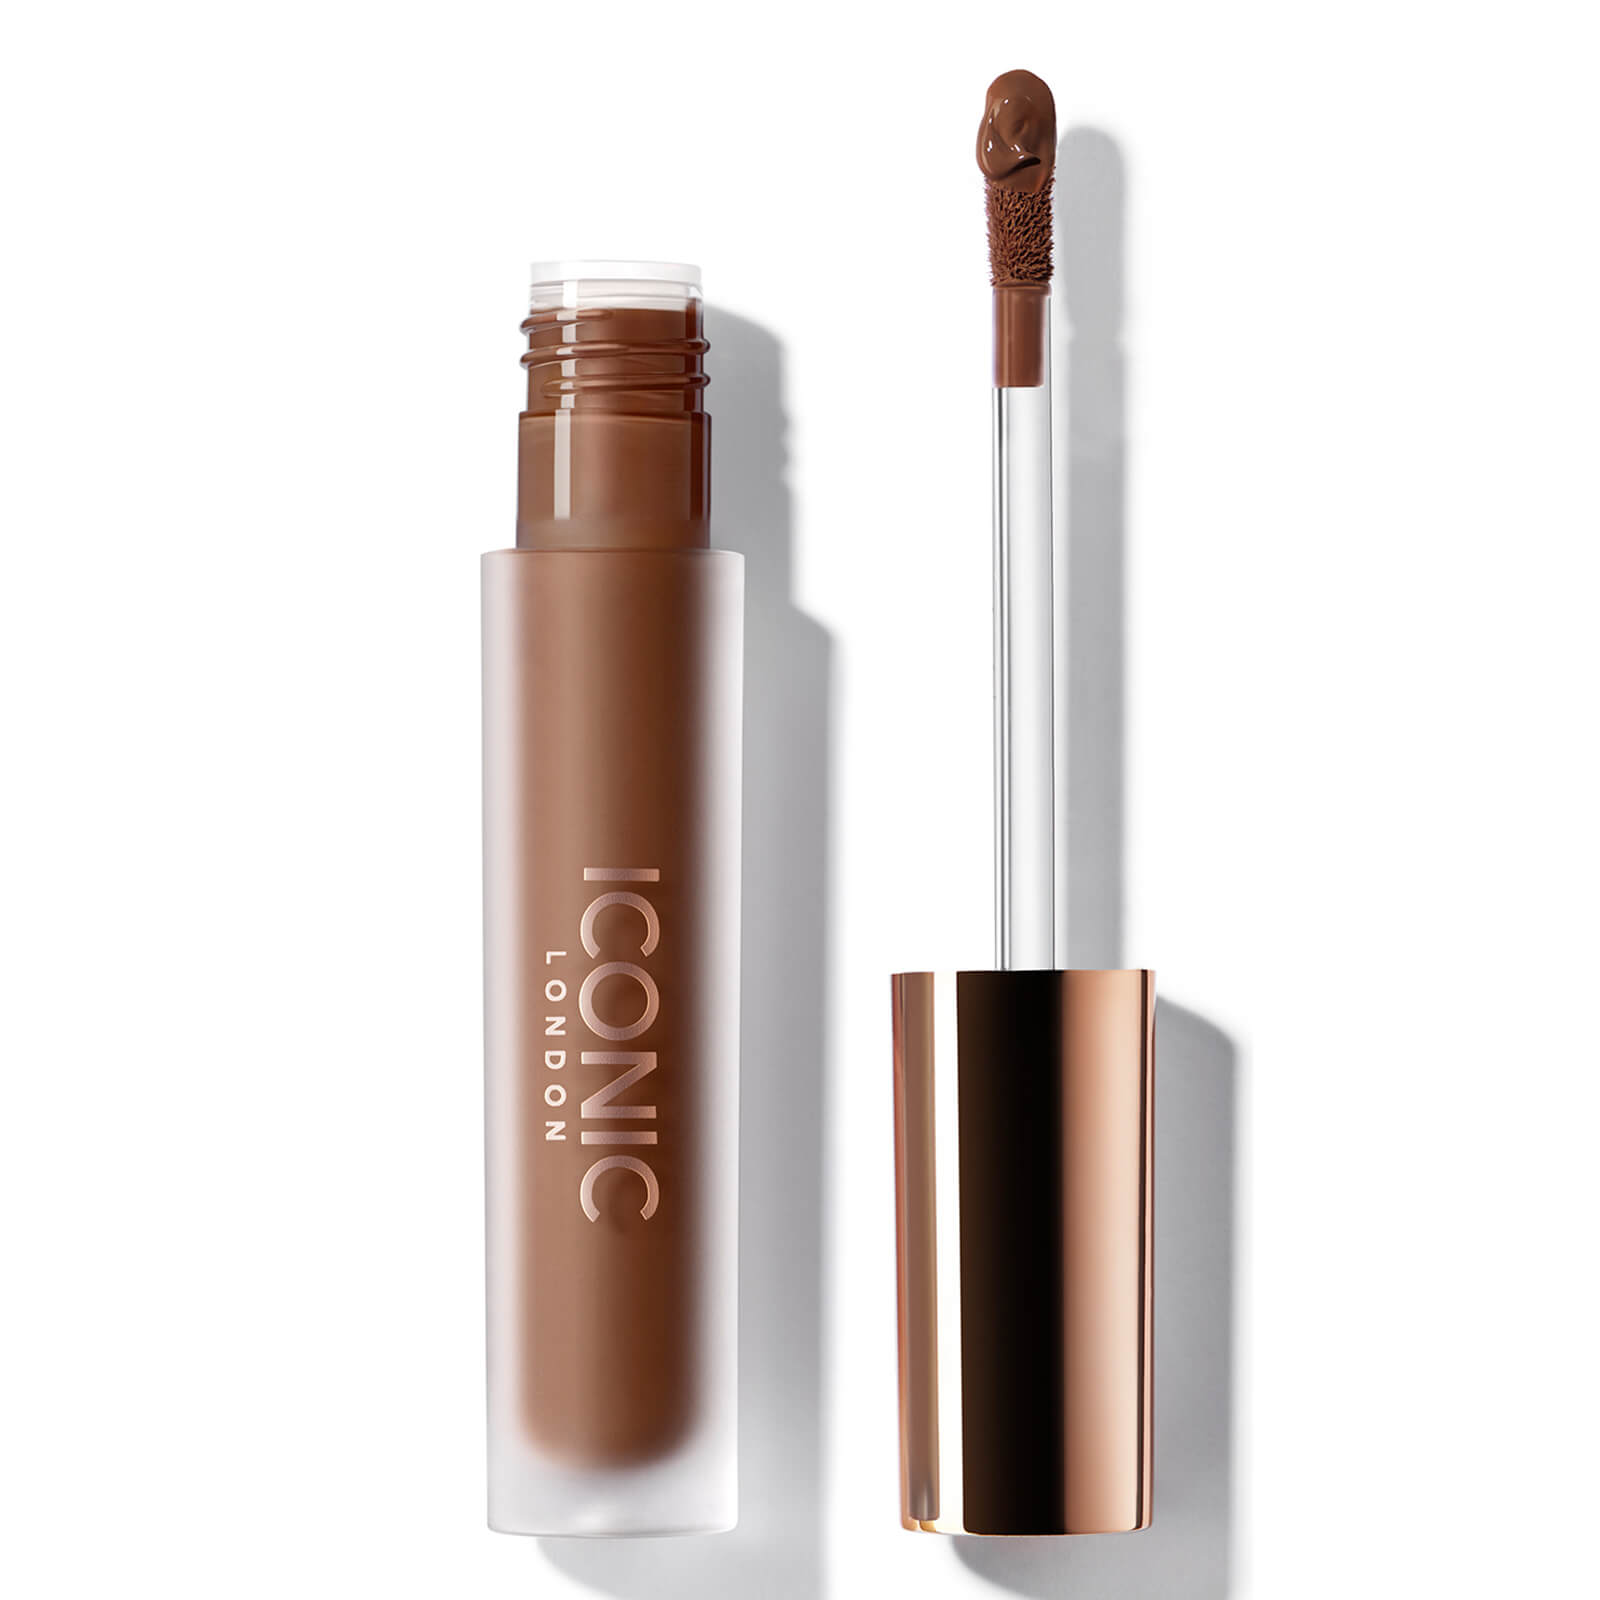 ICONIC London Seamless Concealer 4.2ml (Various Shades) - Rich Ebony von ICONIC London